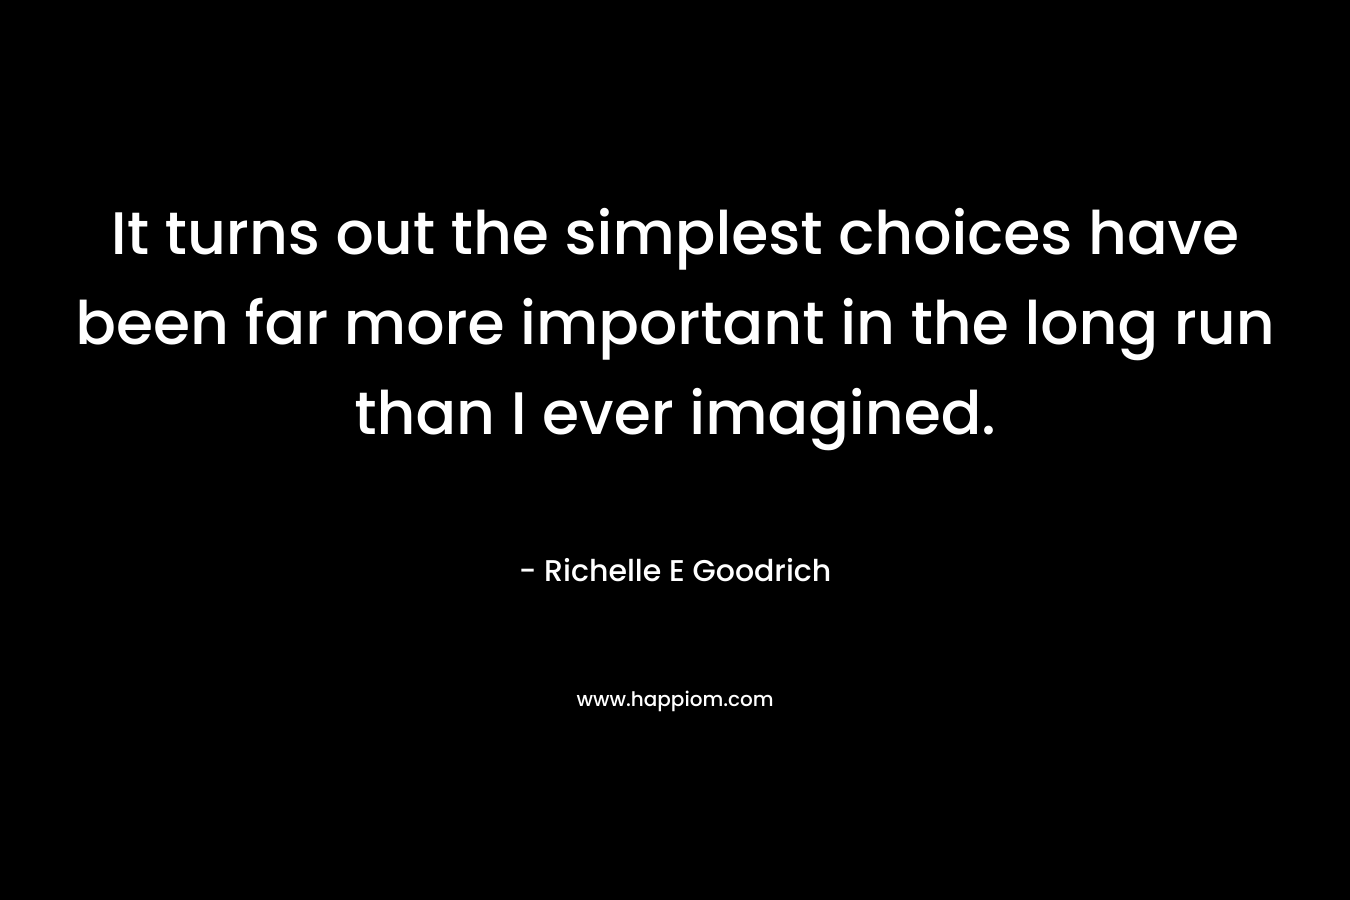 It turns out the simplest choices have been far more important in the long run than I ever imagined. – Richelle E Goodrich